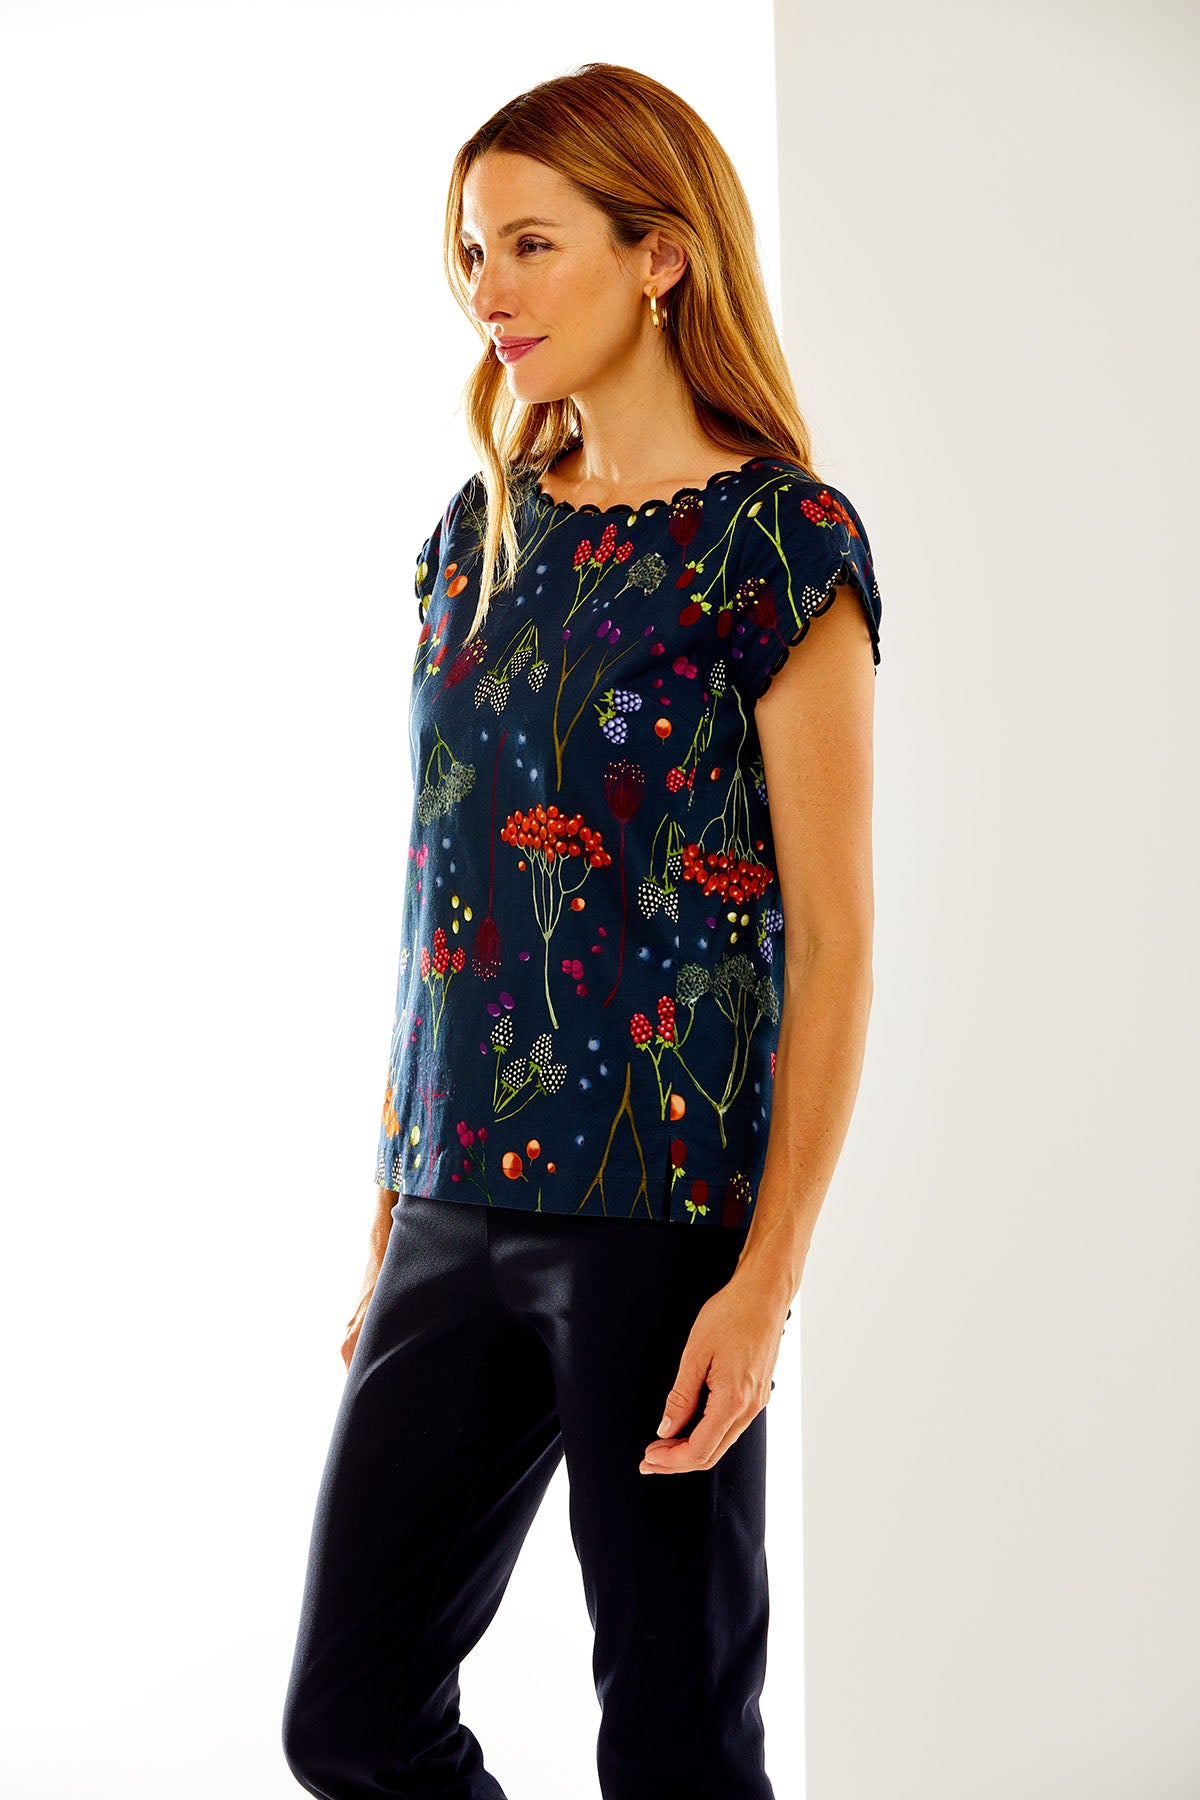 Woman in floral short sleeve top